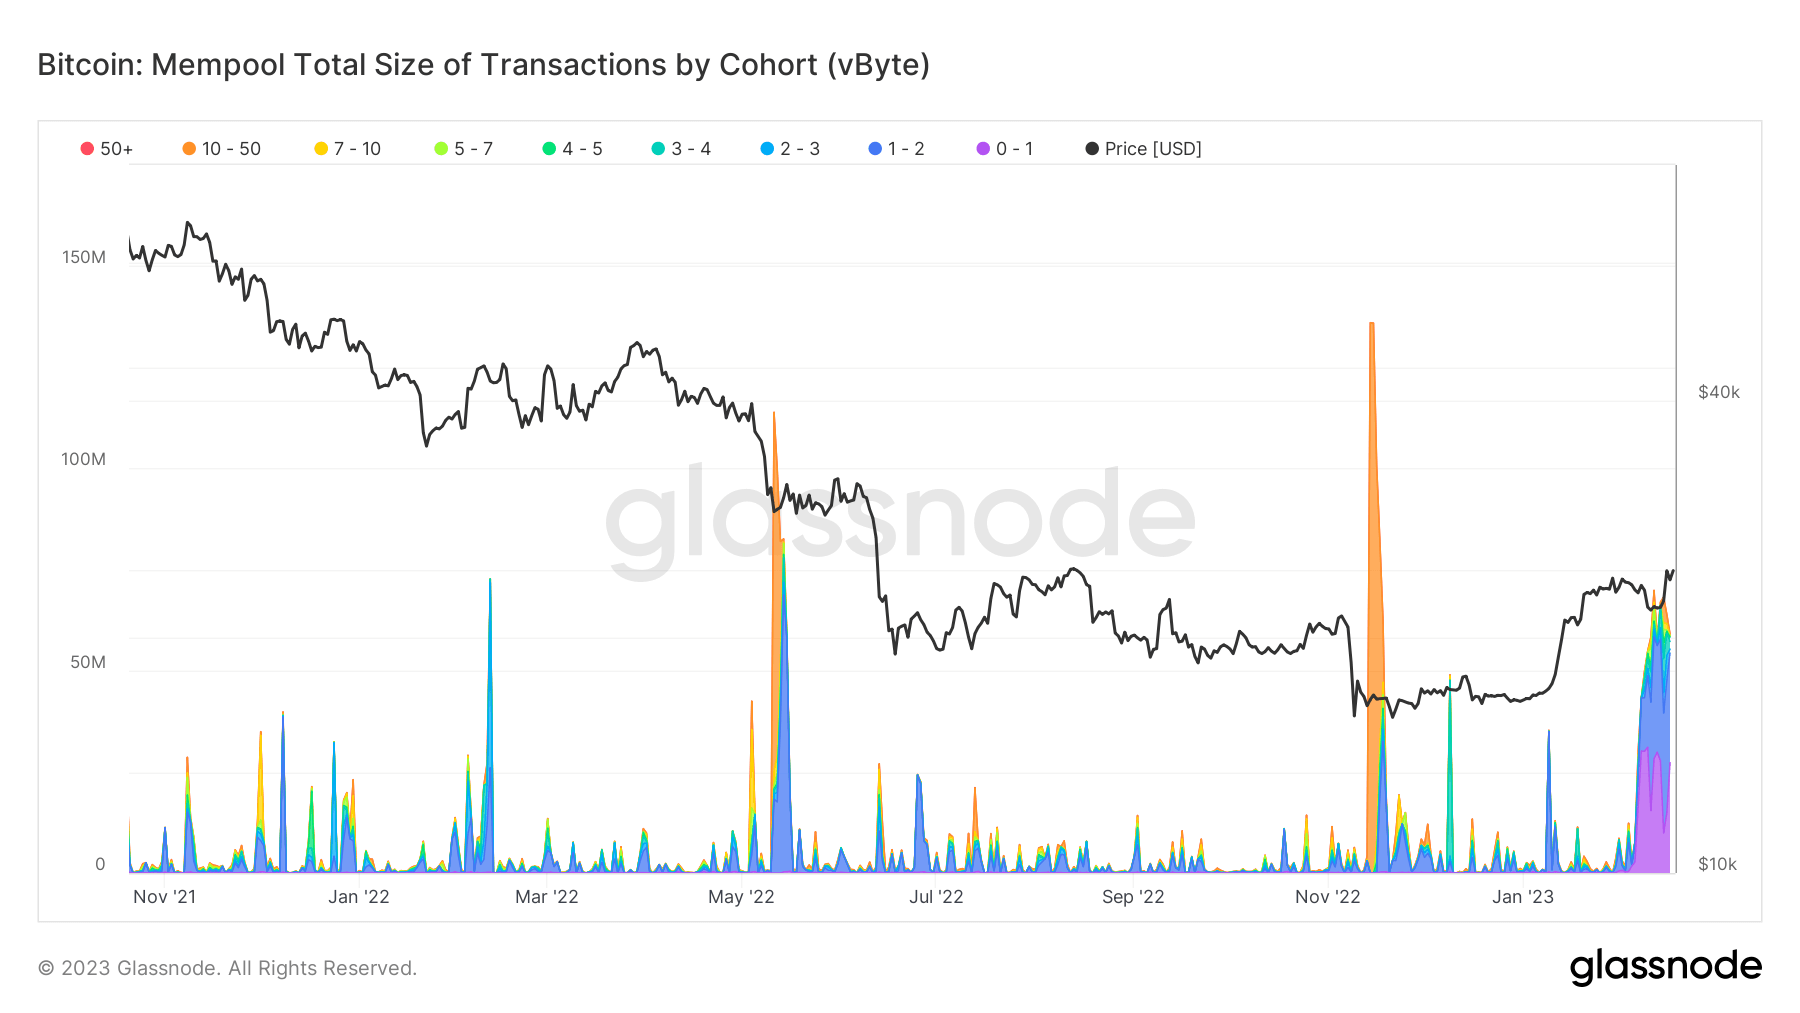 Bitcoin mempool total size of transactions by cohort